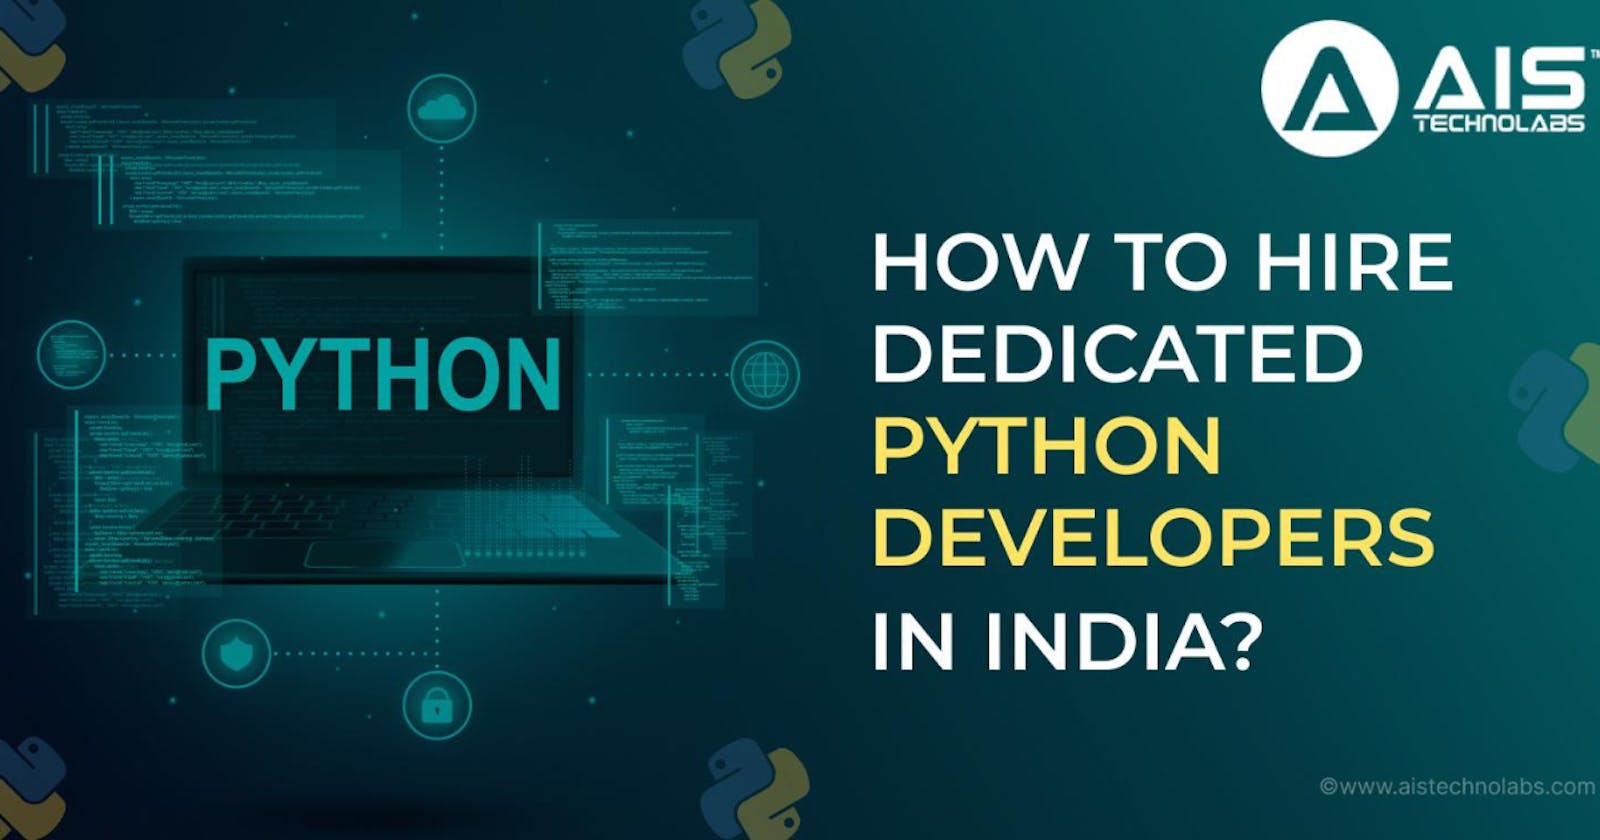 How To Hire Dedicated Python Developers In India